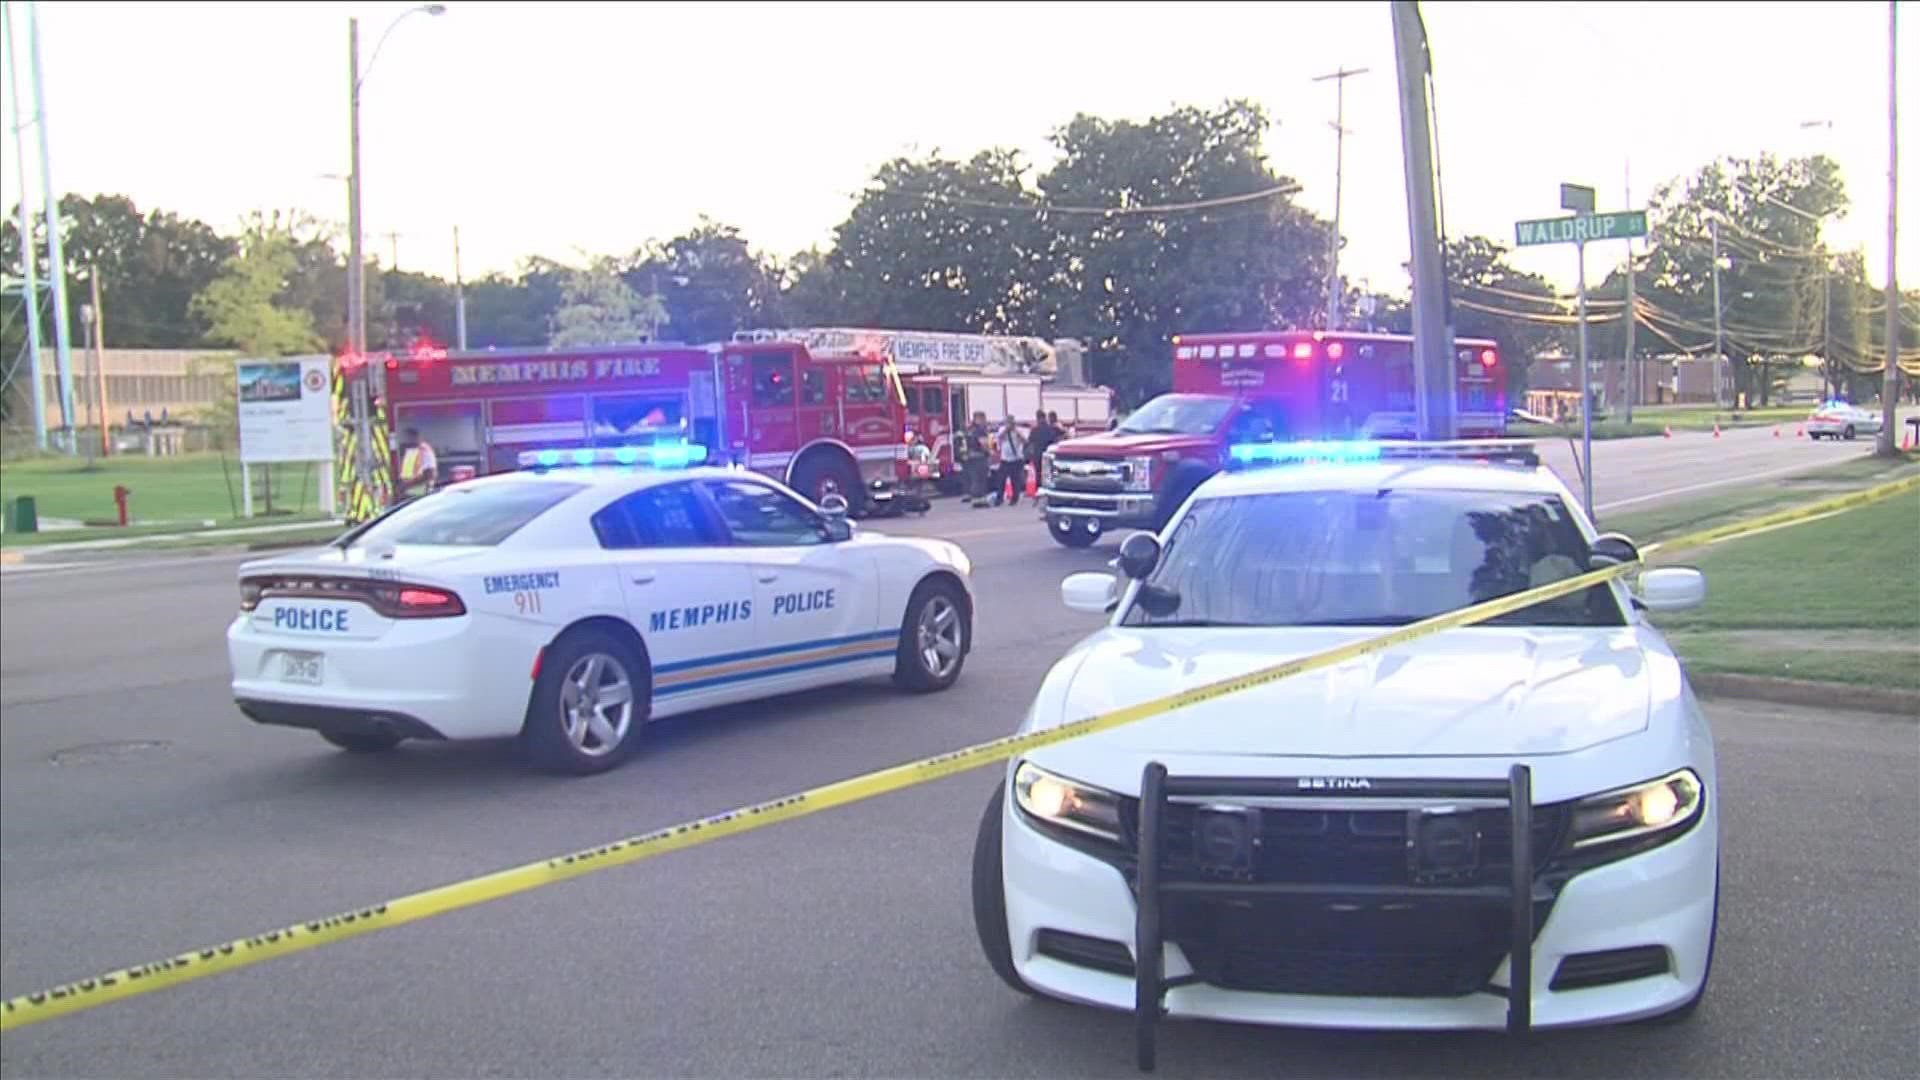 According to the Memphis Fire Department, the accident occurred in front of Station #43 on East Holmes Road.